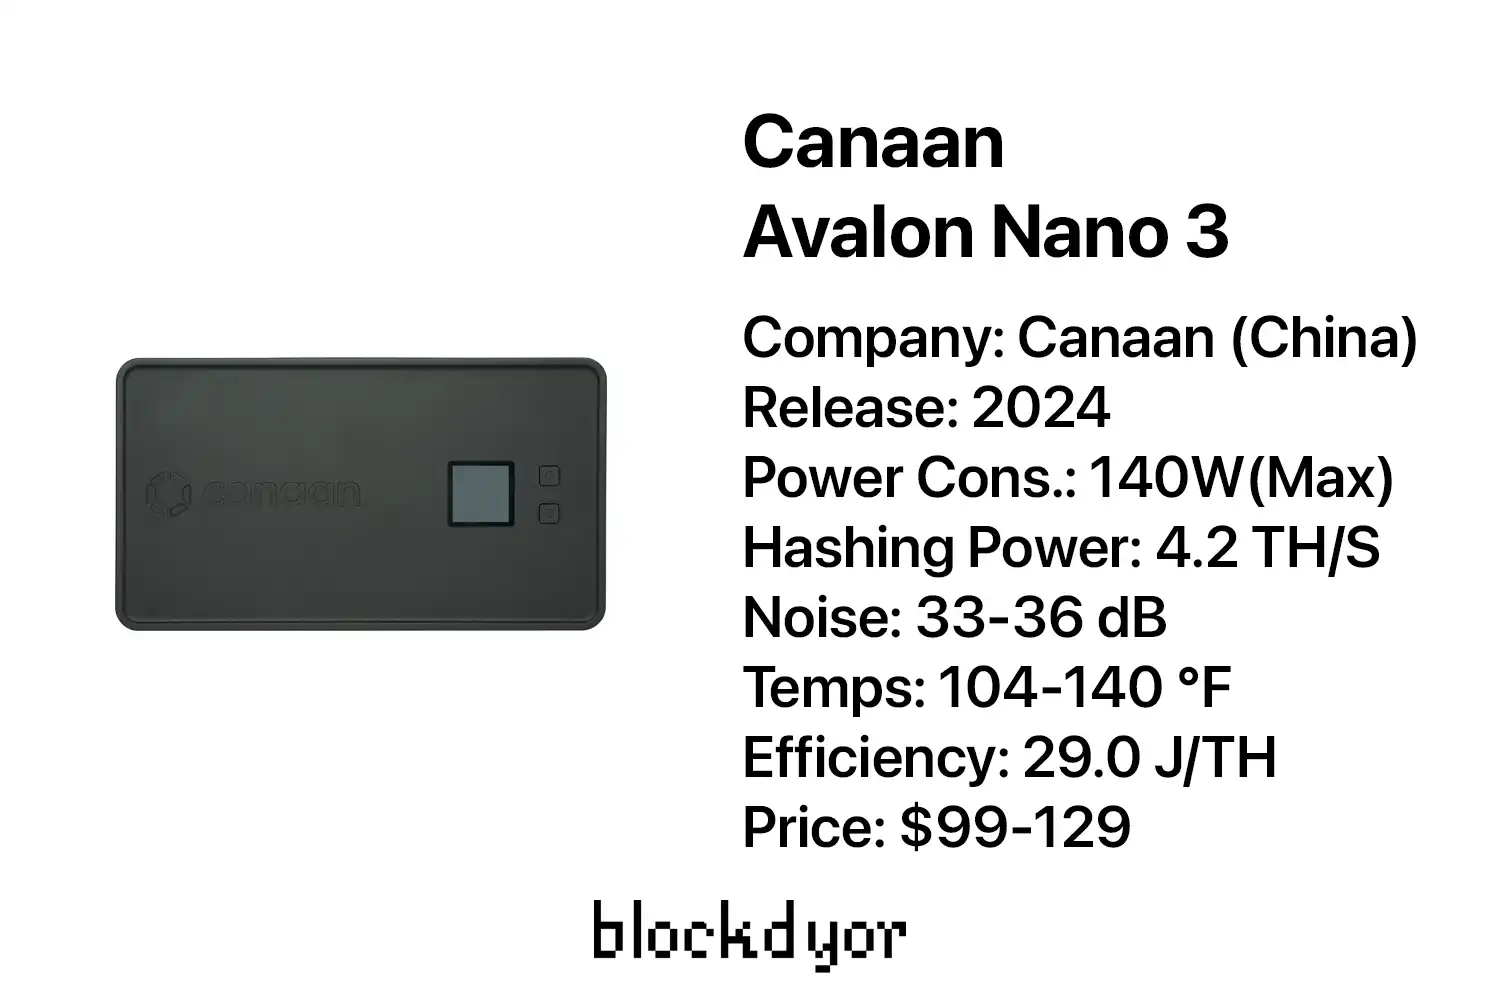 Canaan Avalon Nano 3 Overview